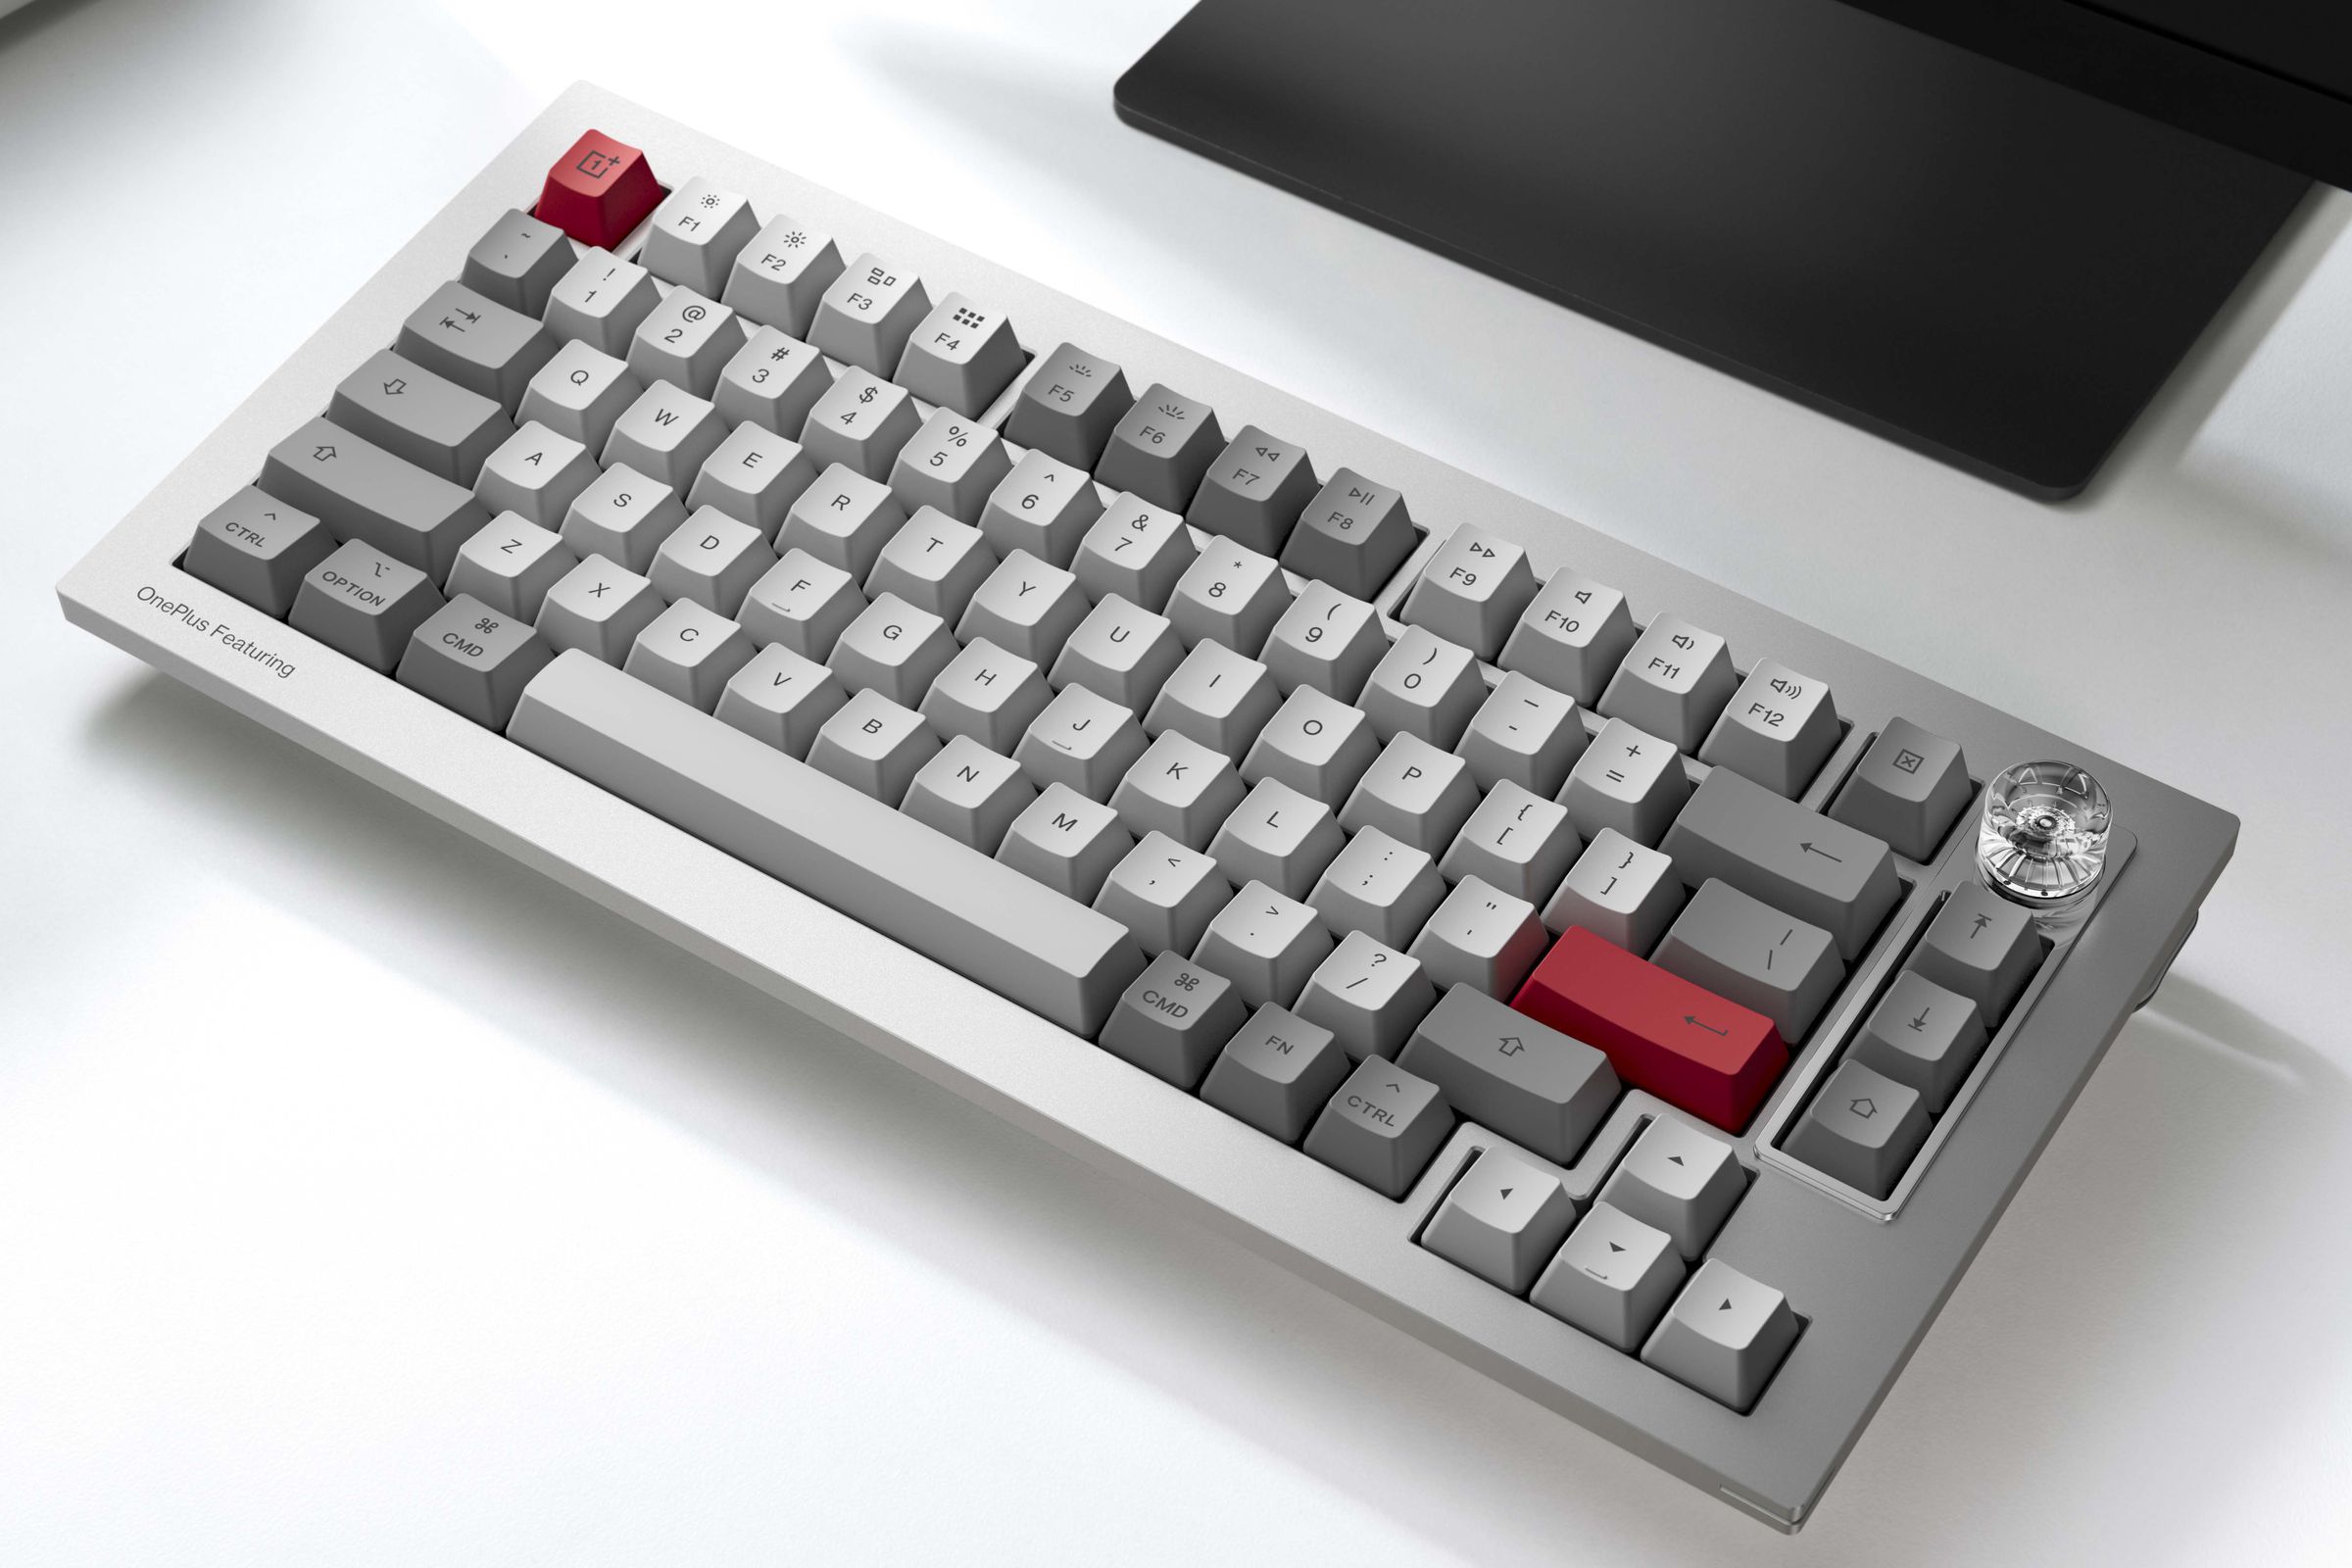 OnePlus Keyboard 81 Pro pictured on a desk.